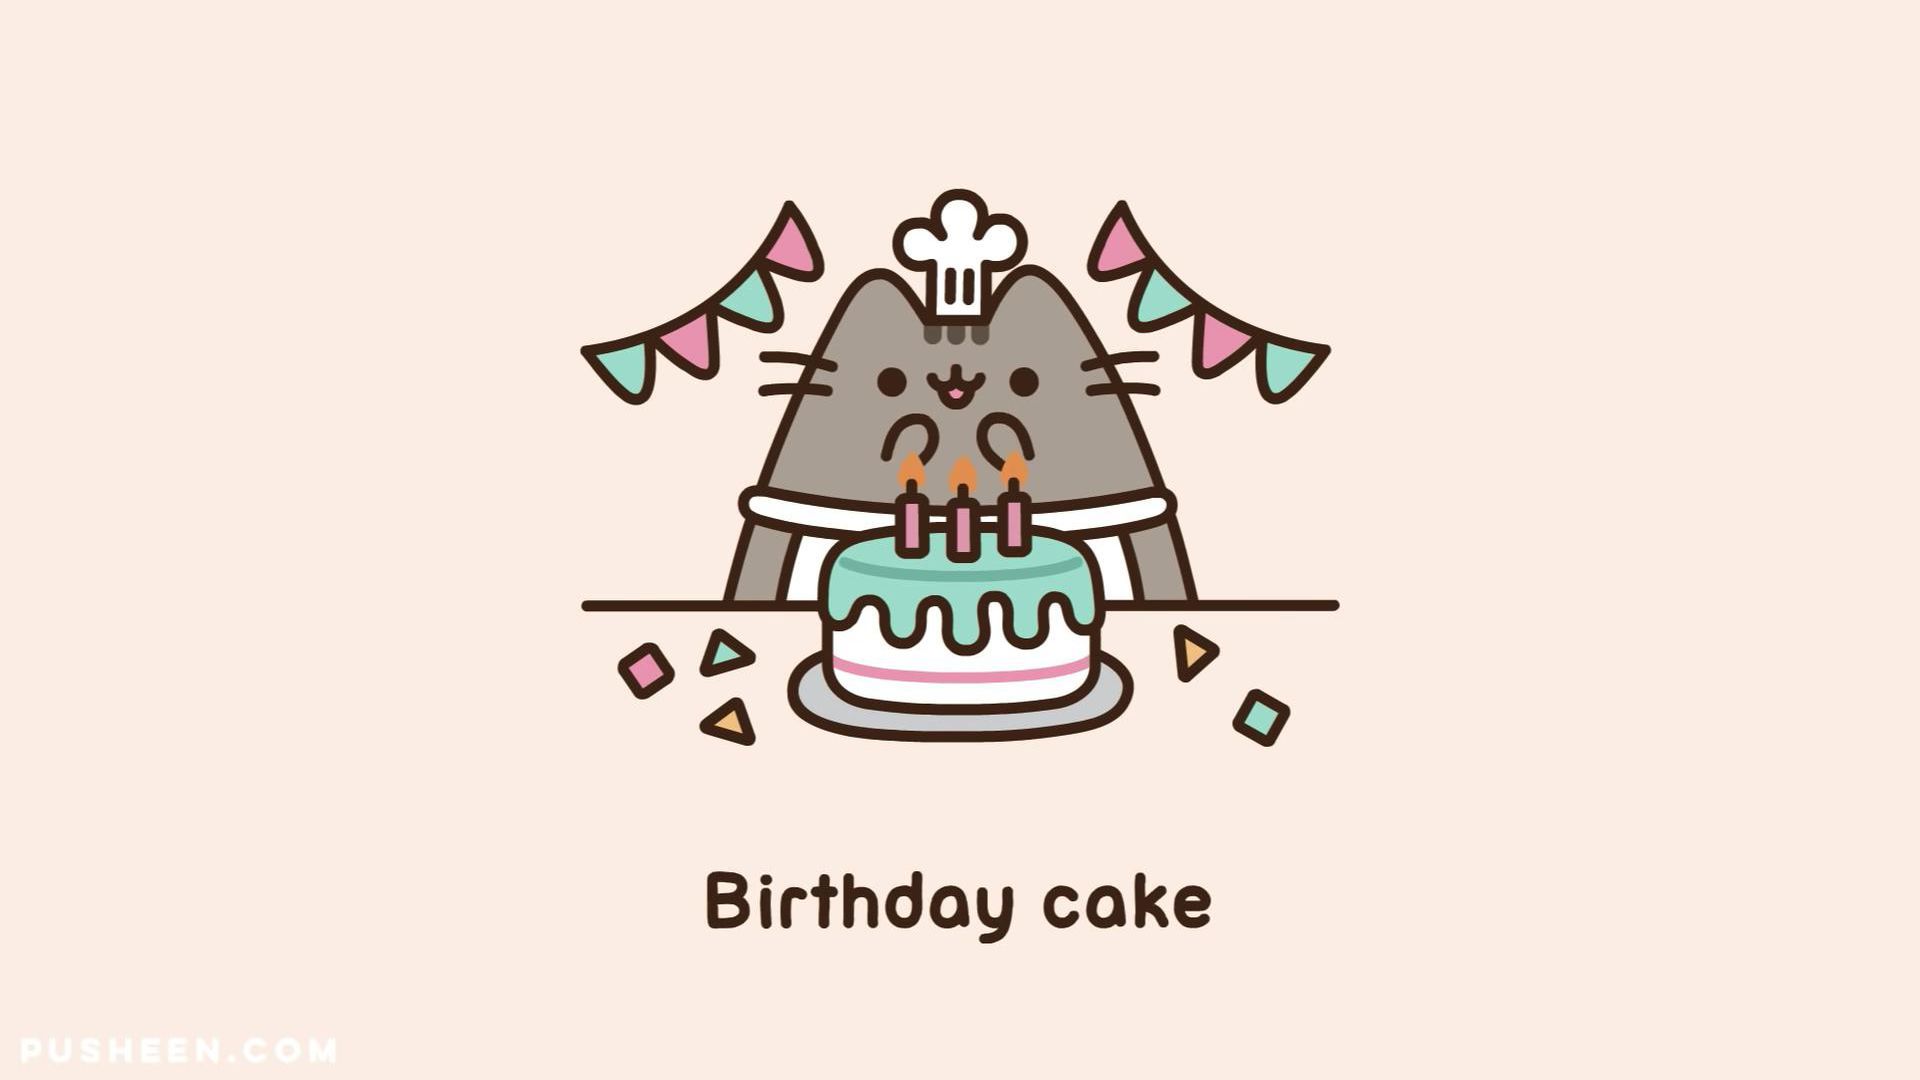 Which Adorable Pusheen Are You?